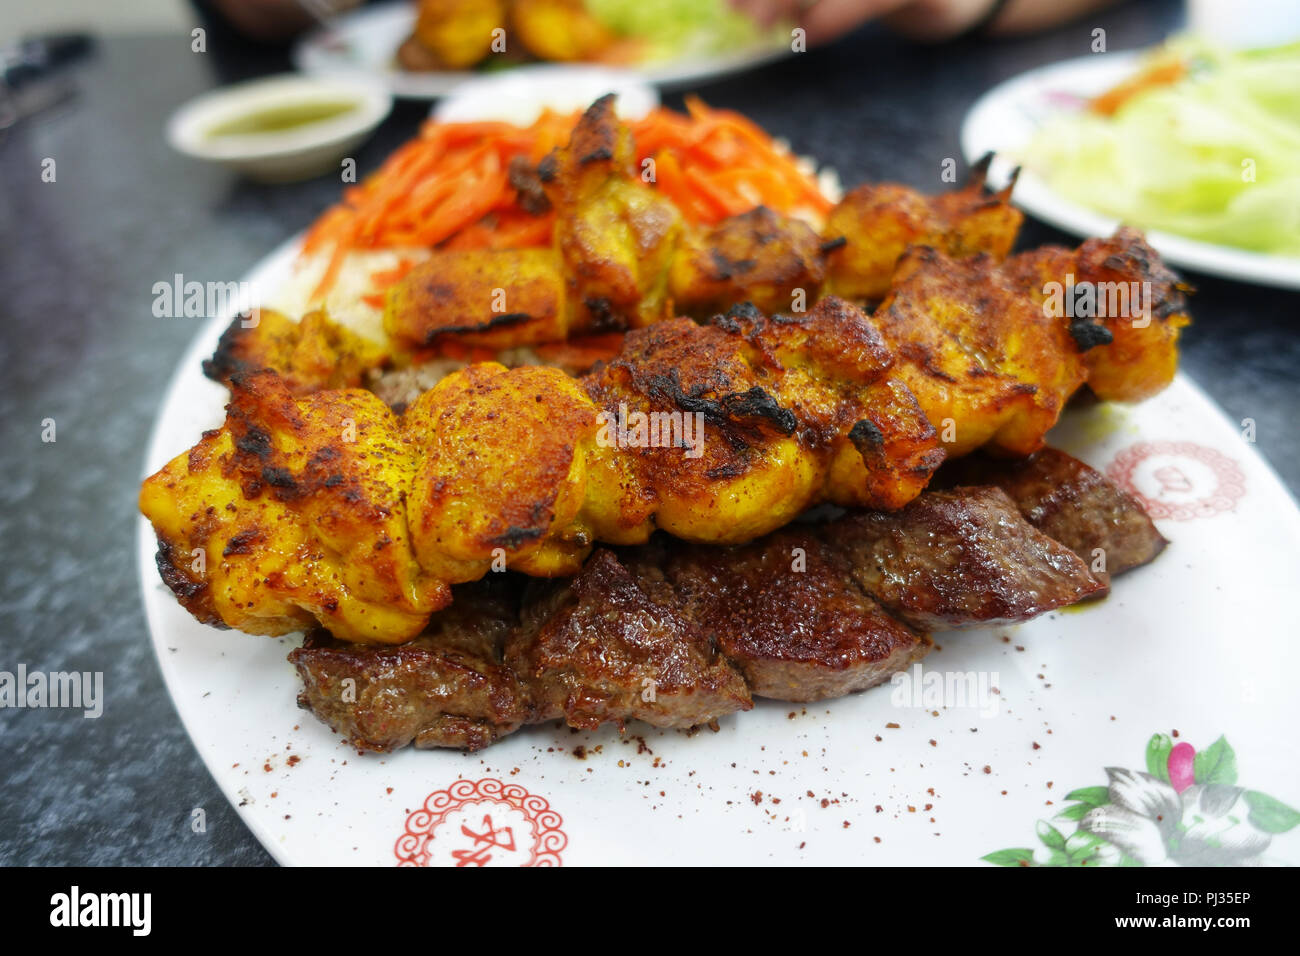 Afghan food, grilled lamb and chicken kebab Stock Photo